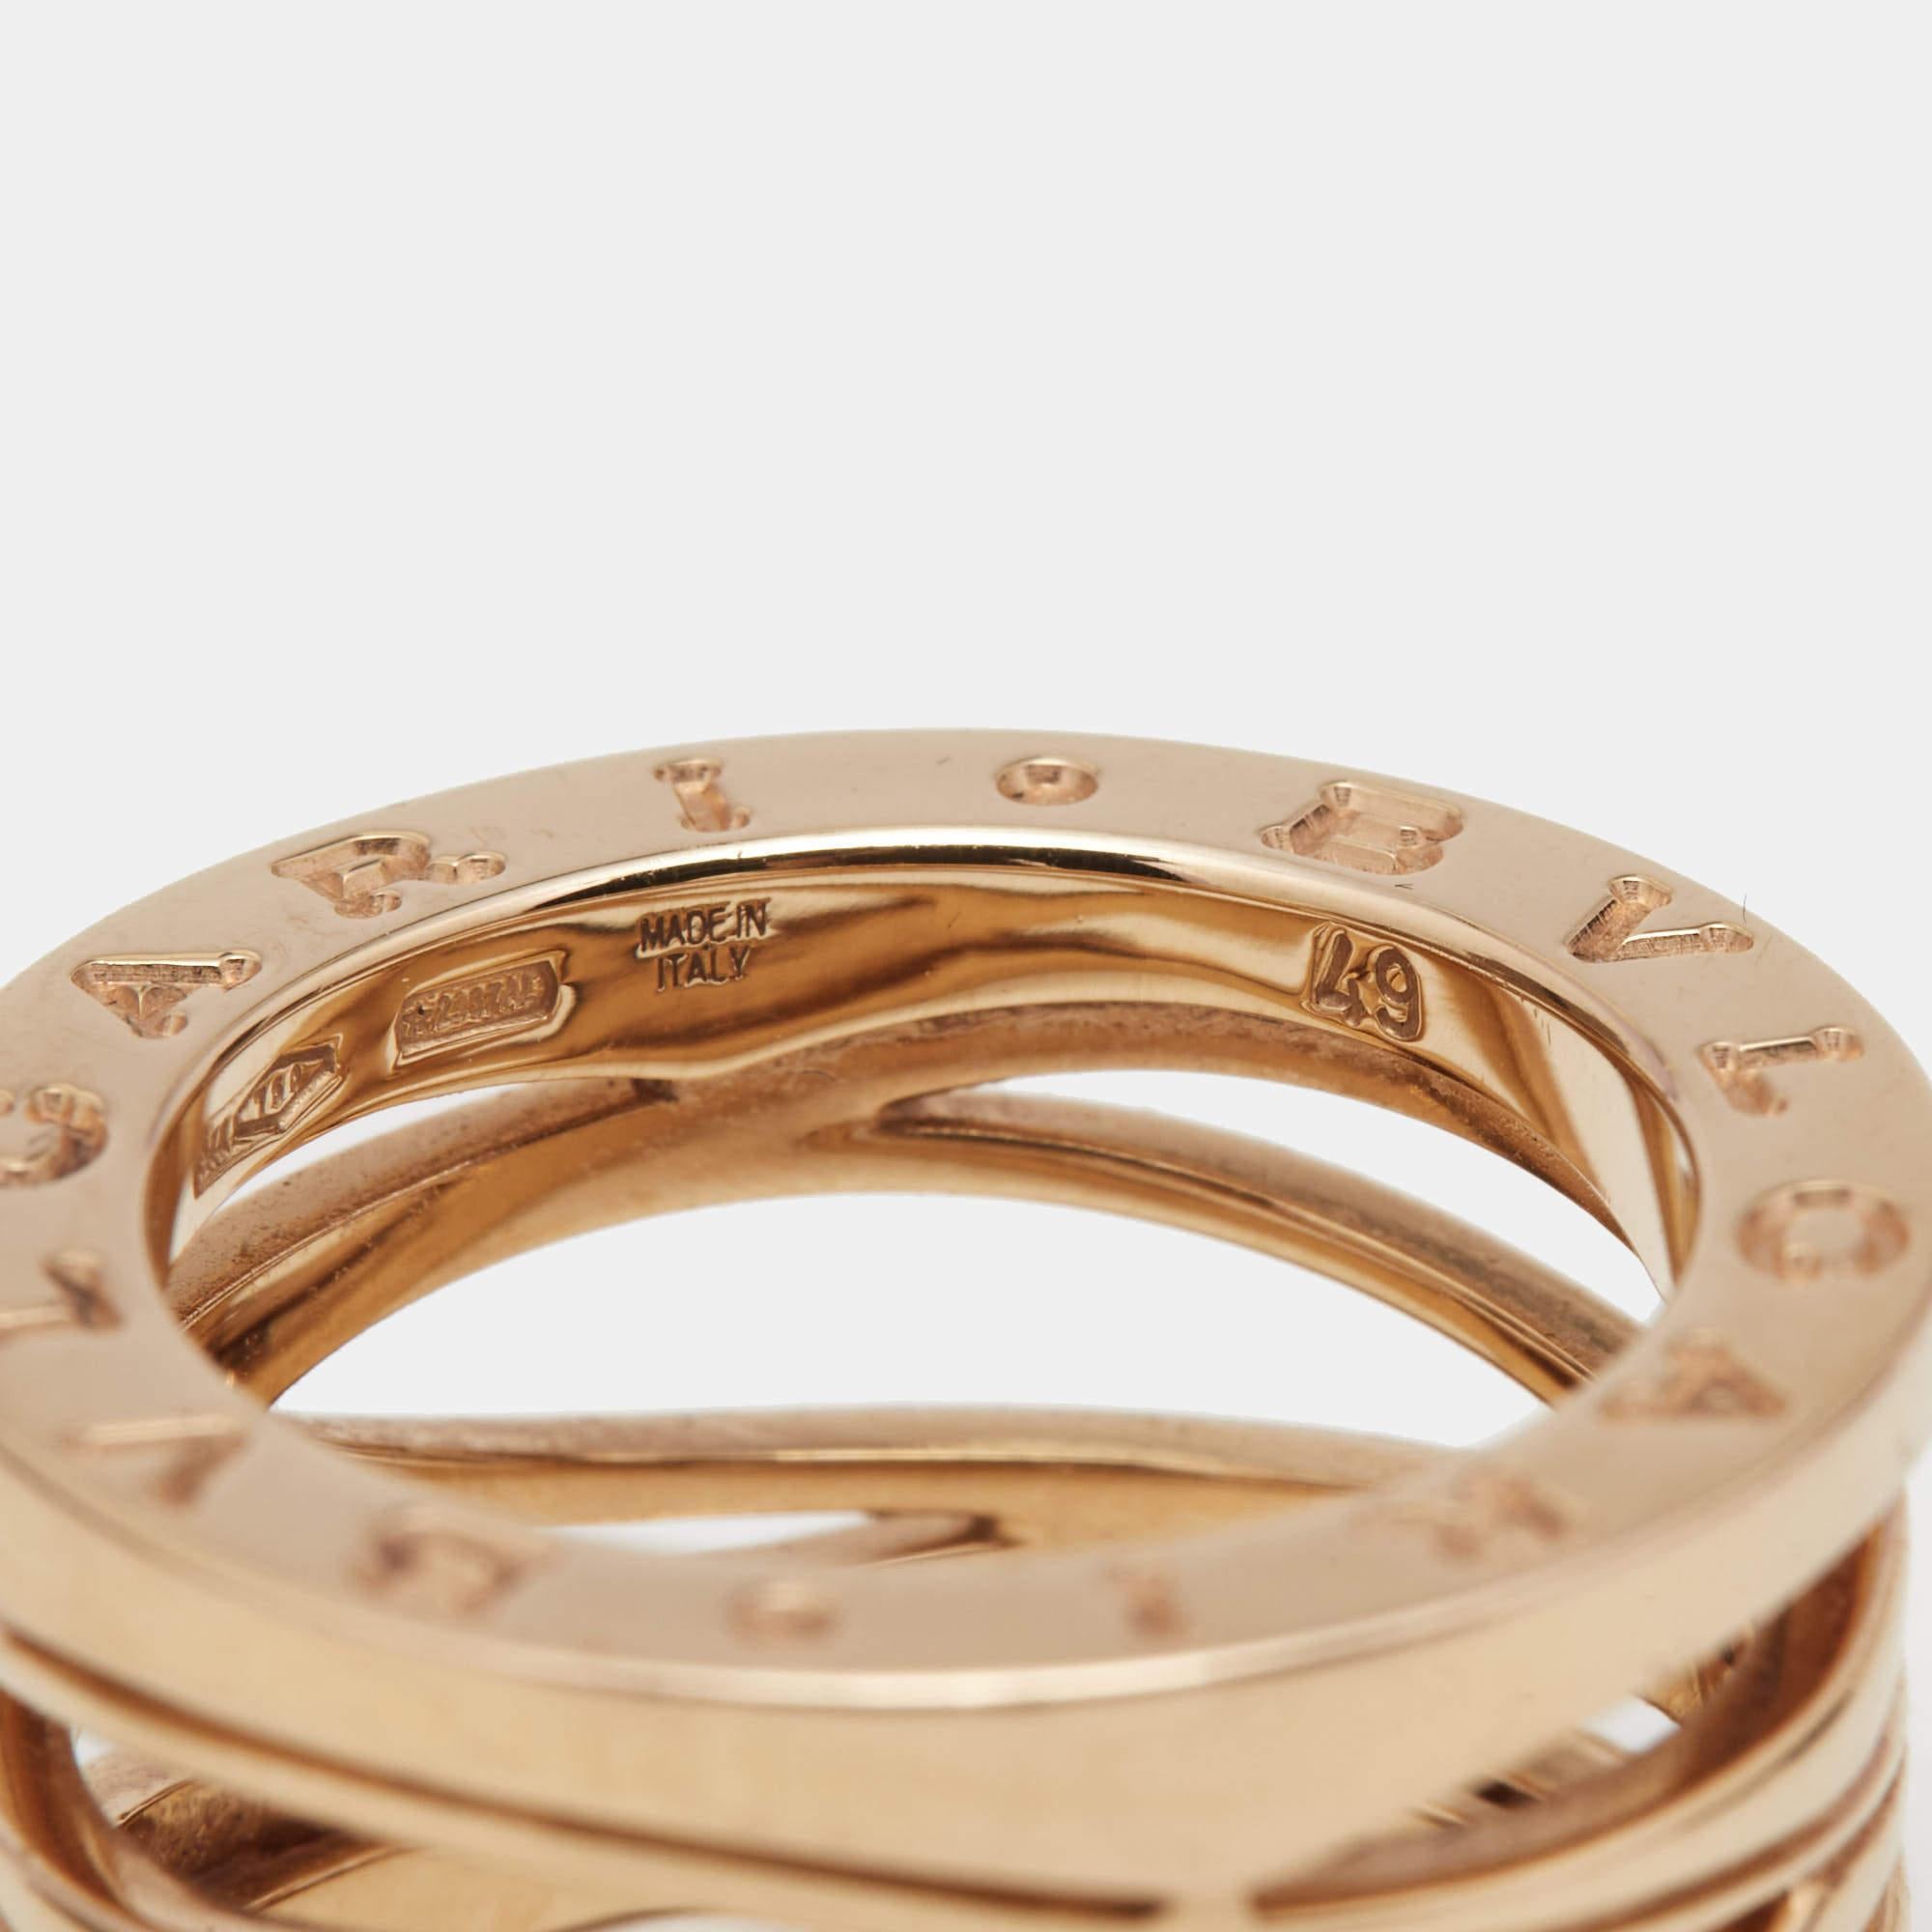 For the woman who has a refined taste in fine jewelry, Bvlgari brings her this immaculately crafted ring that has been made to be praised. The ring has a rather modern style of bands in 18k rose gold. Reinterpreted by Zaha Hadid, the new B. Zero1